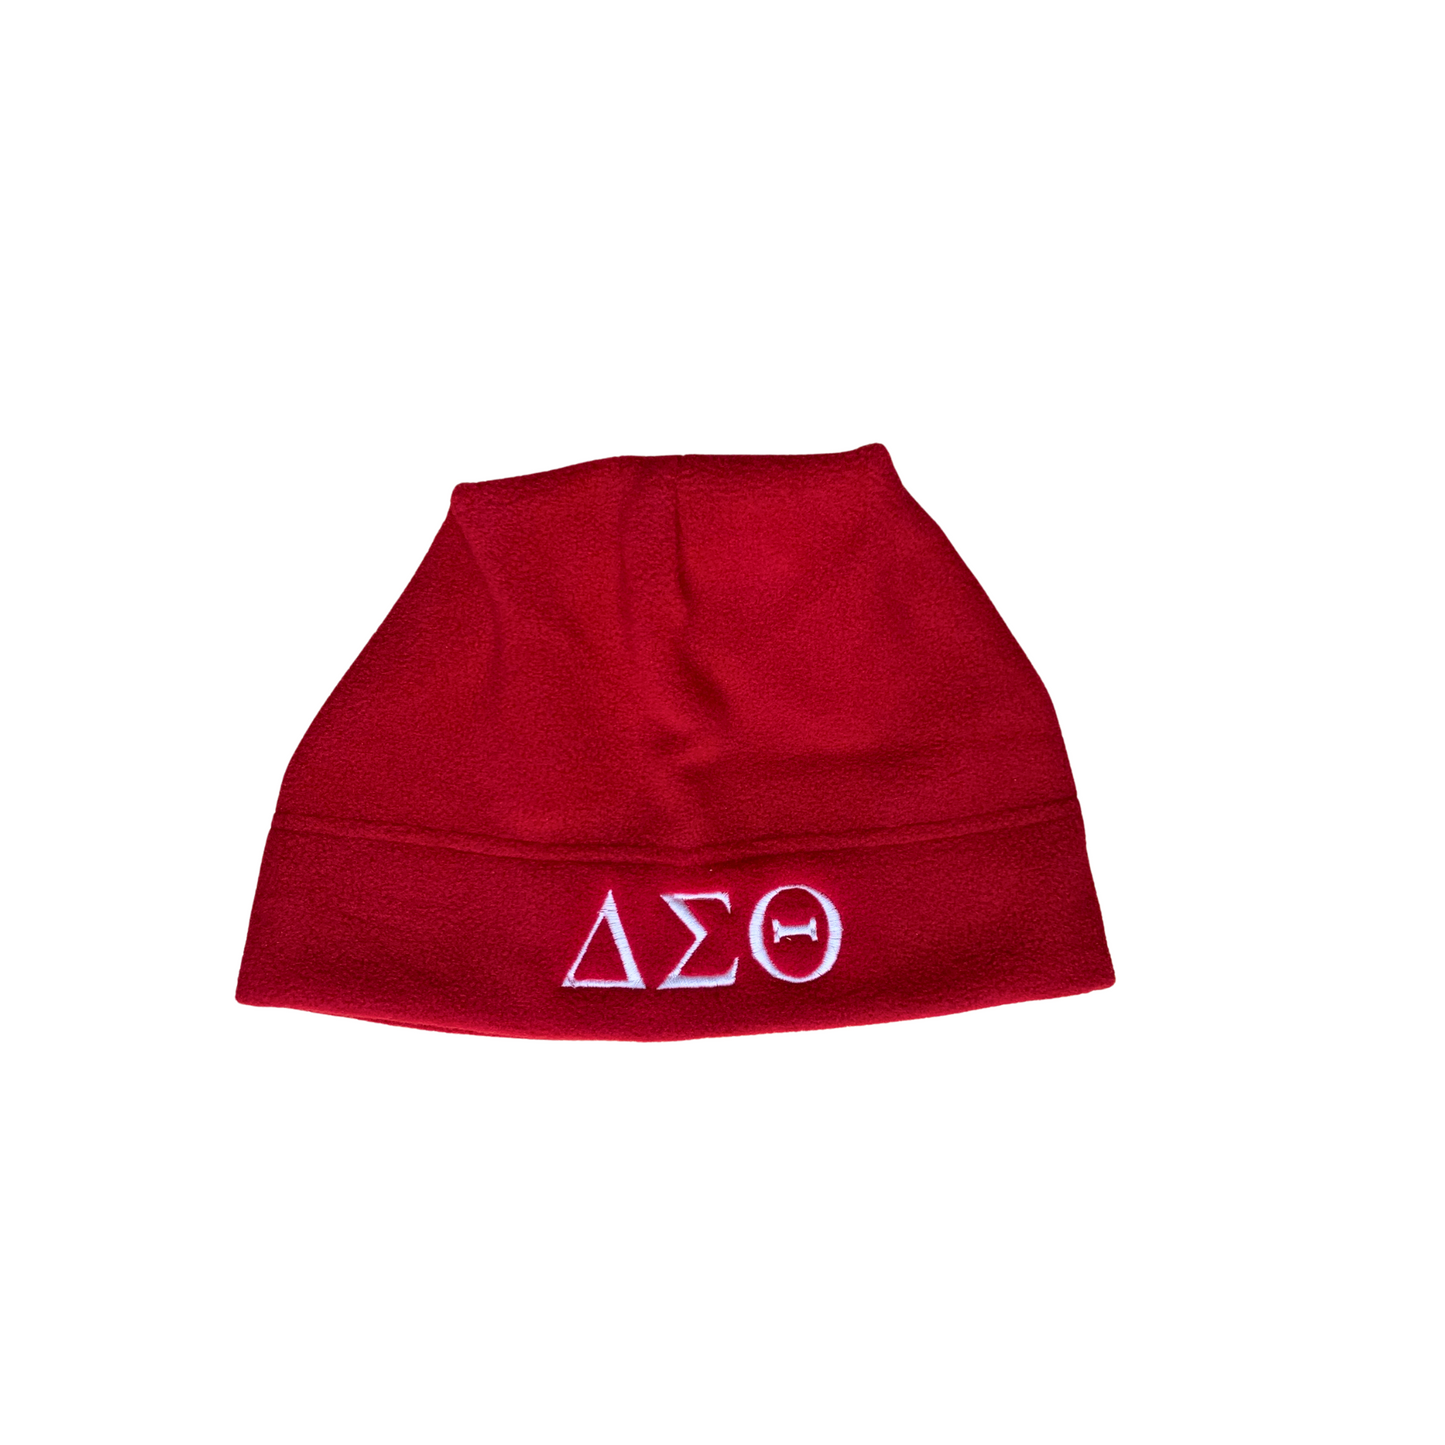 Delta Sigma Theta Personalized Embroidered Fleece Hat Beanie